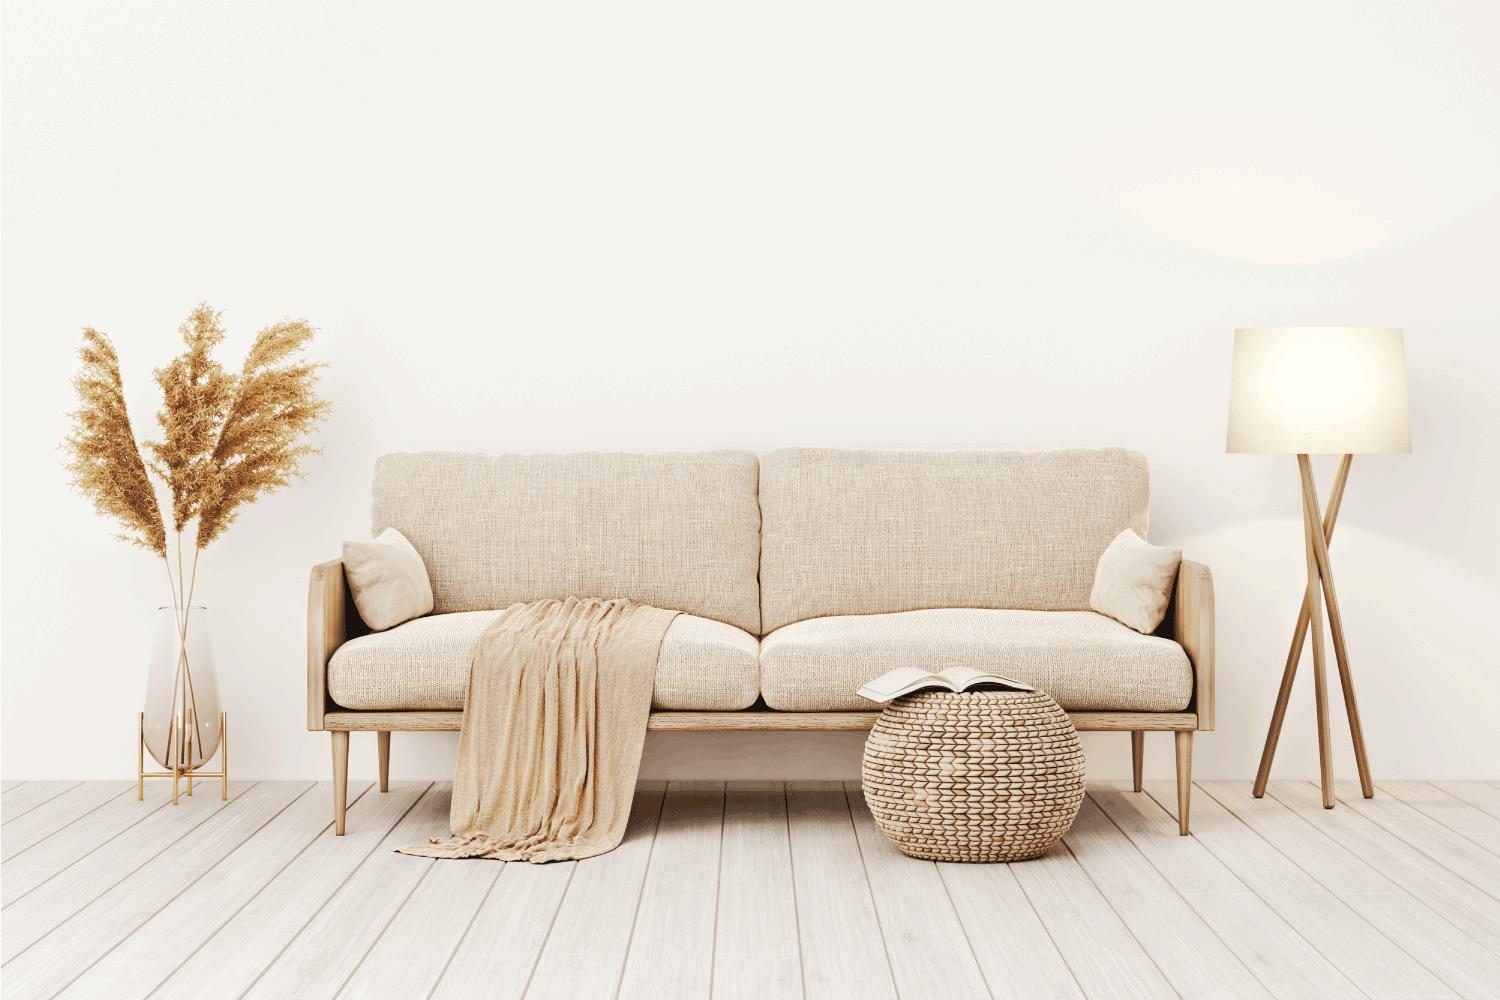 Living room interior wall mockup in warm tones with beige linen sofa, dried Pampas grass, woven table and boho style decoration